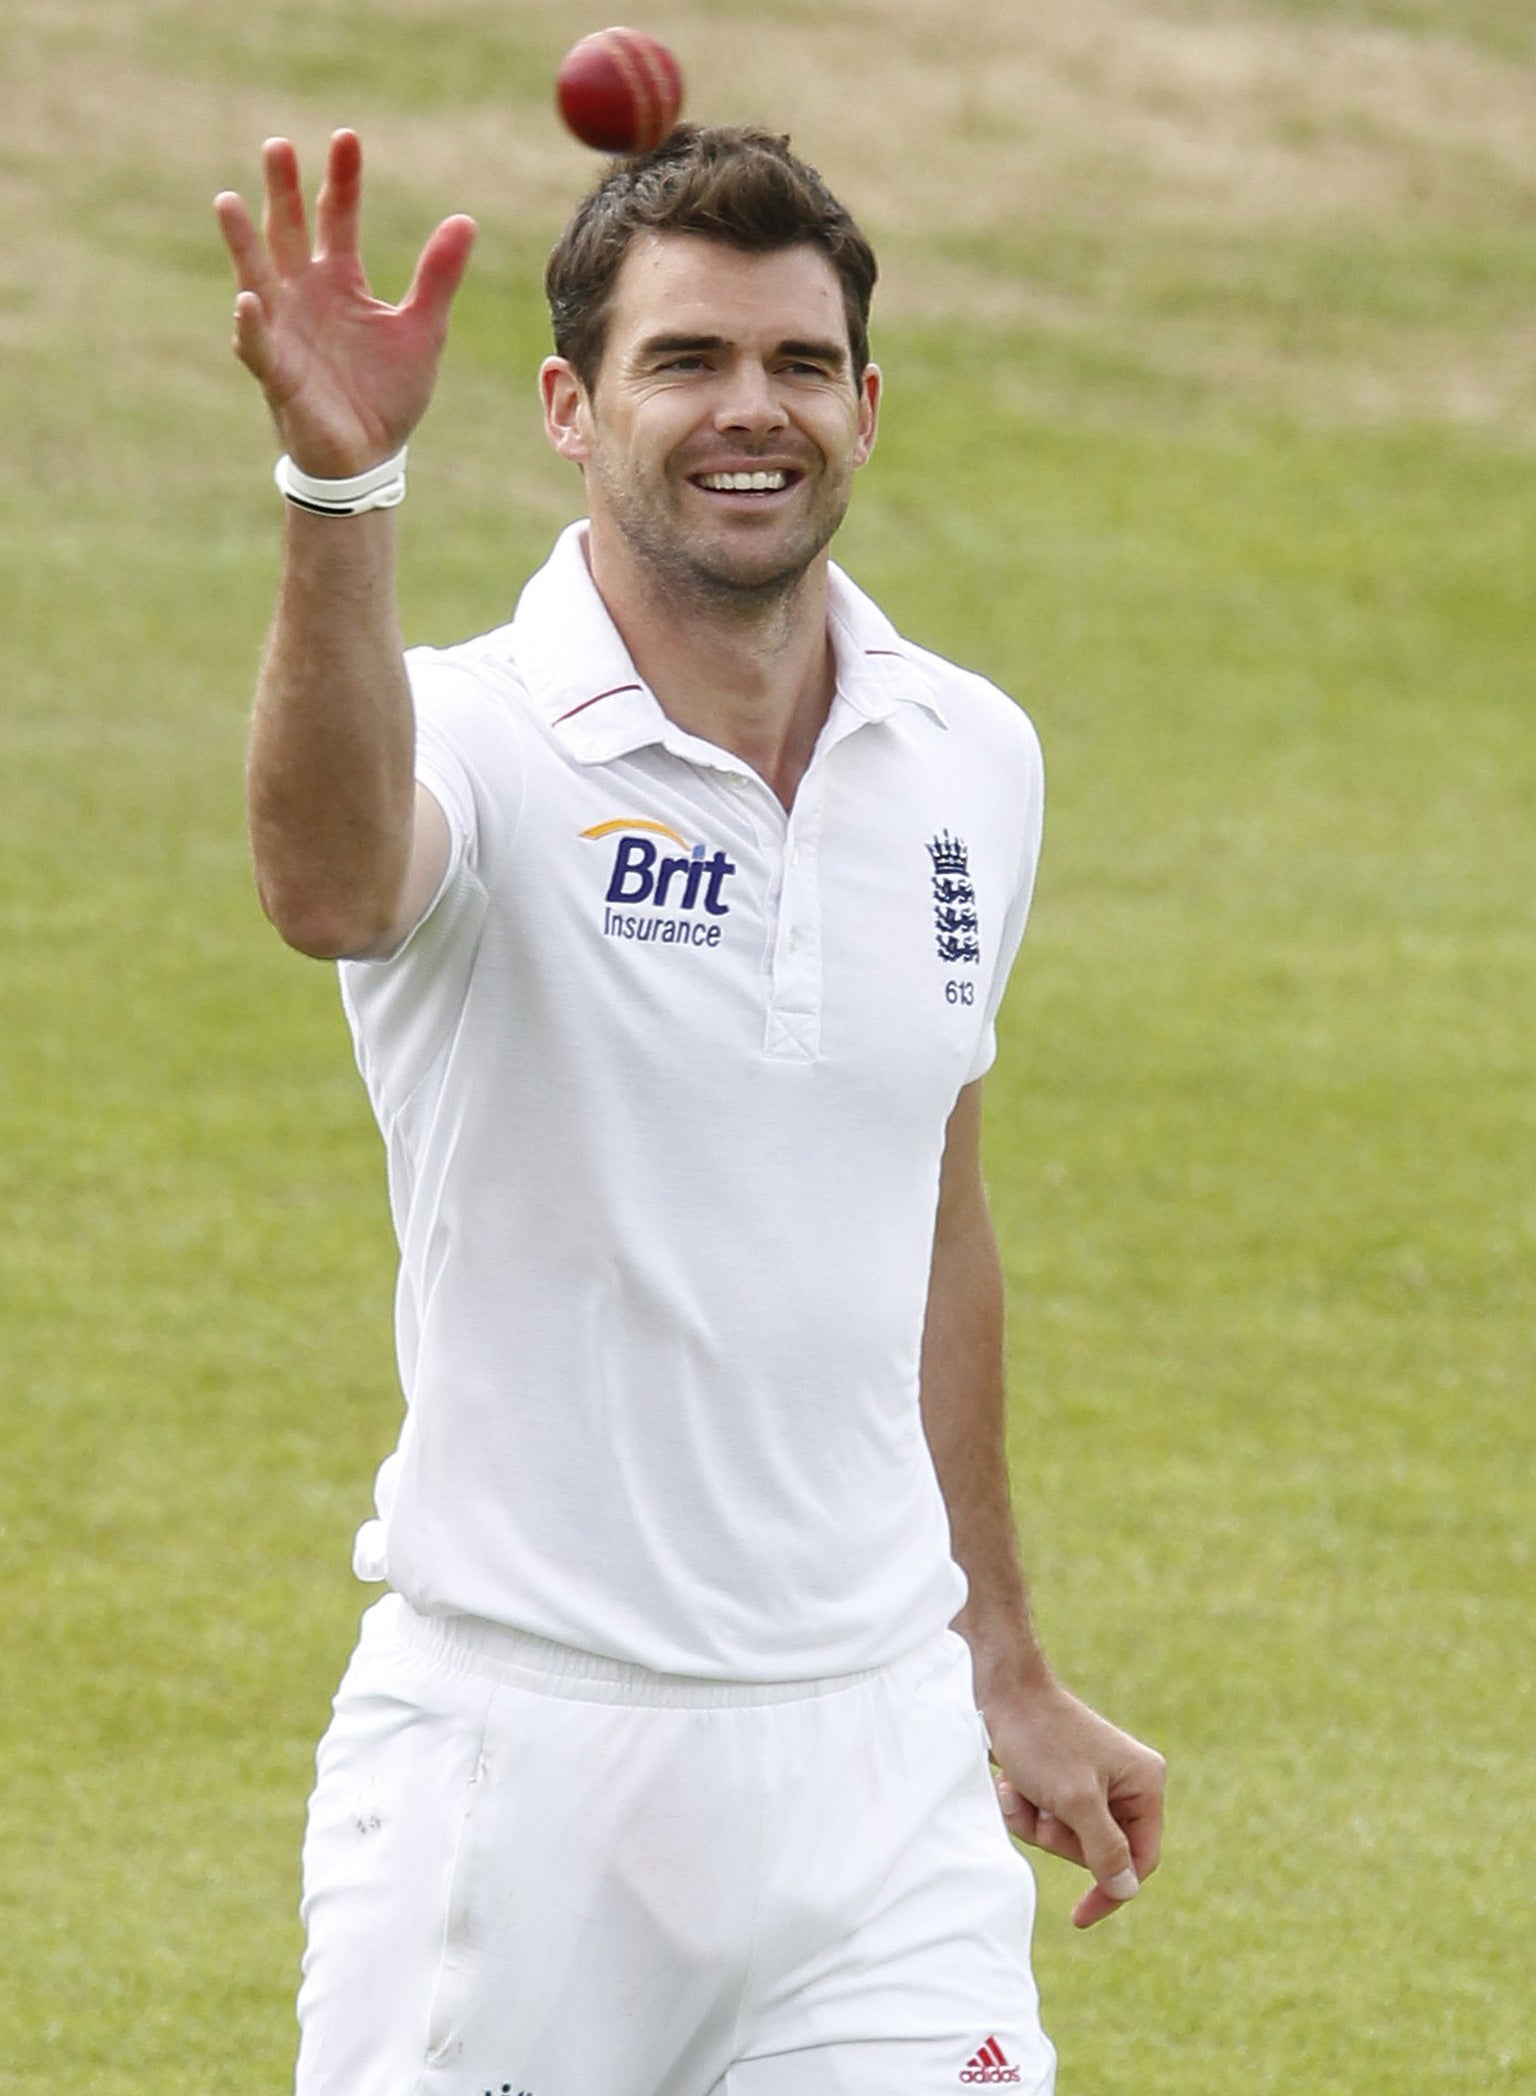 Jimmy Anderson’s adhesive attributes with the bat help others sleep well